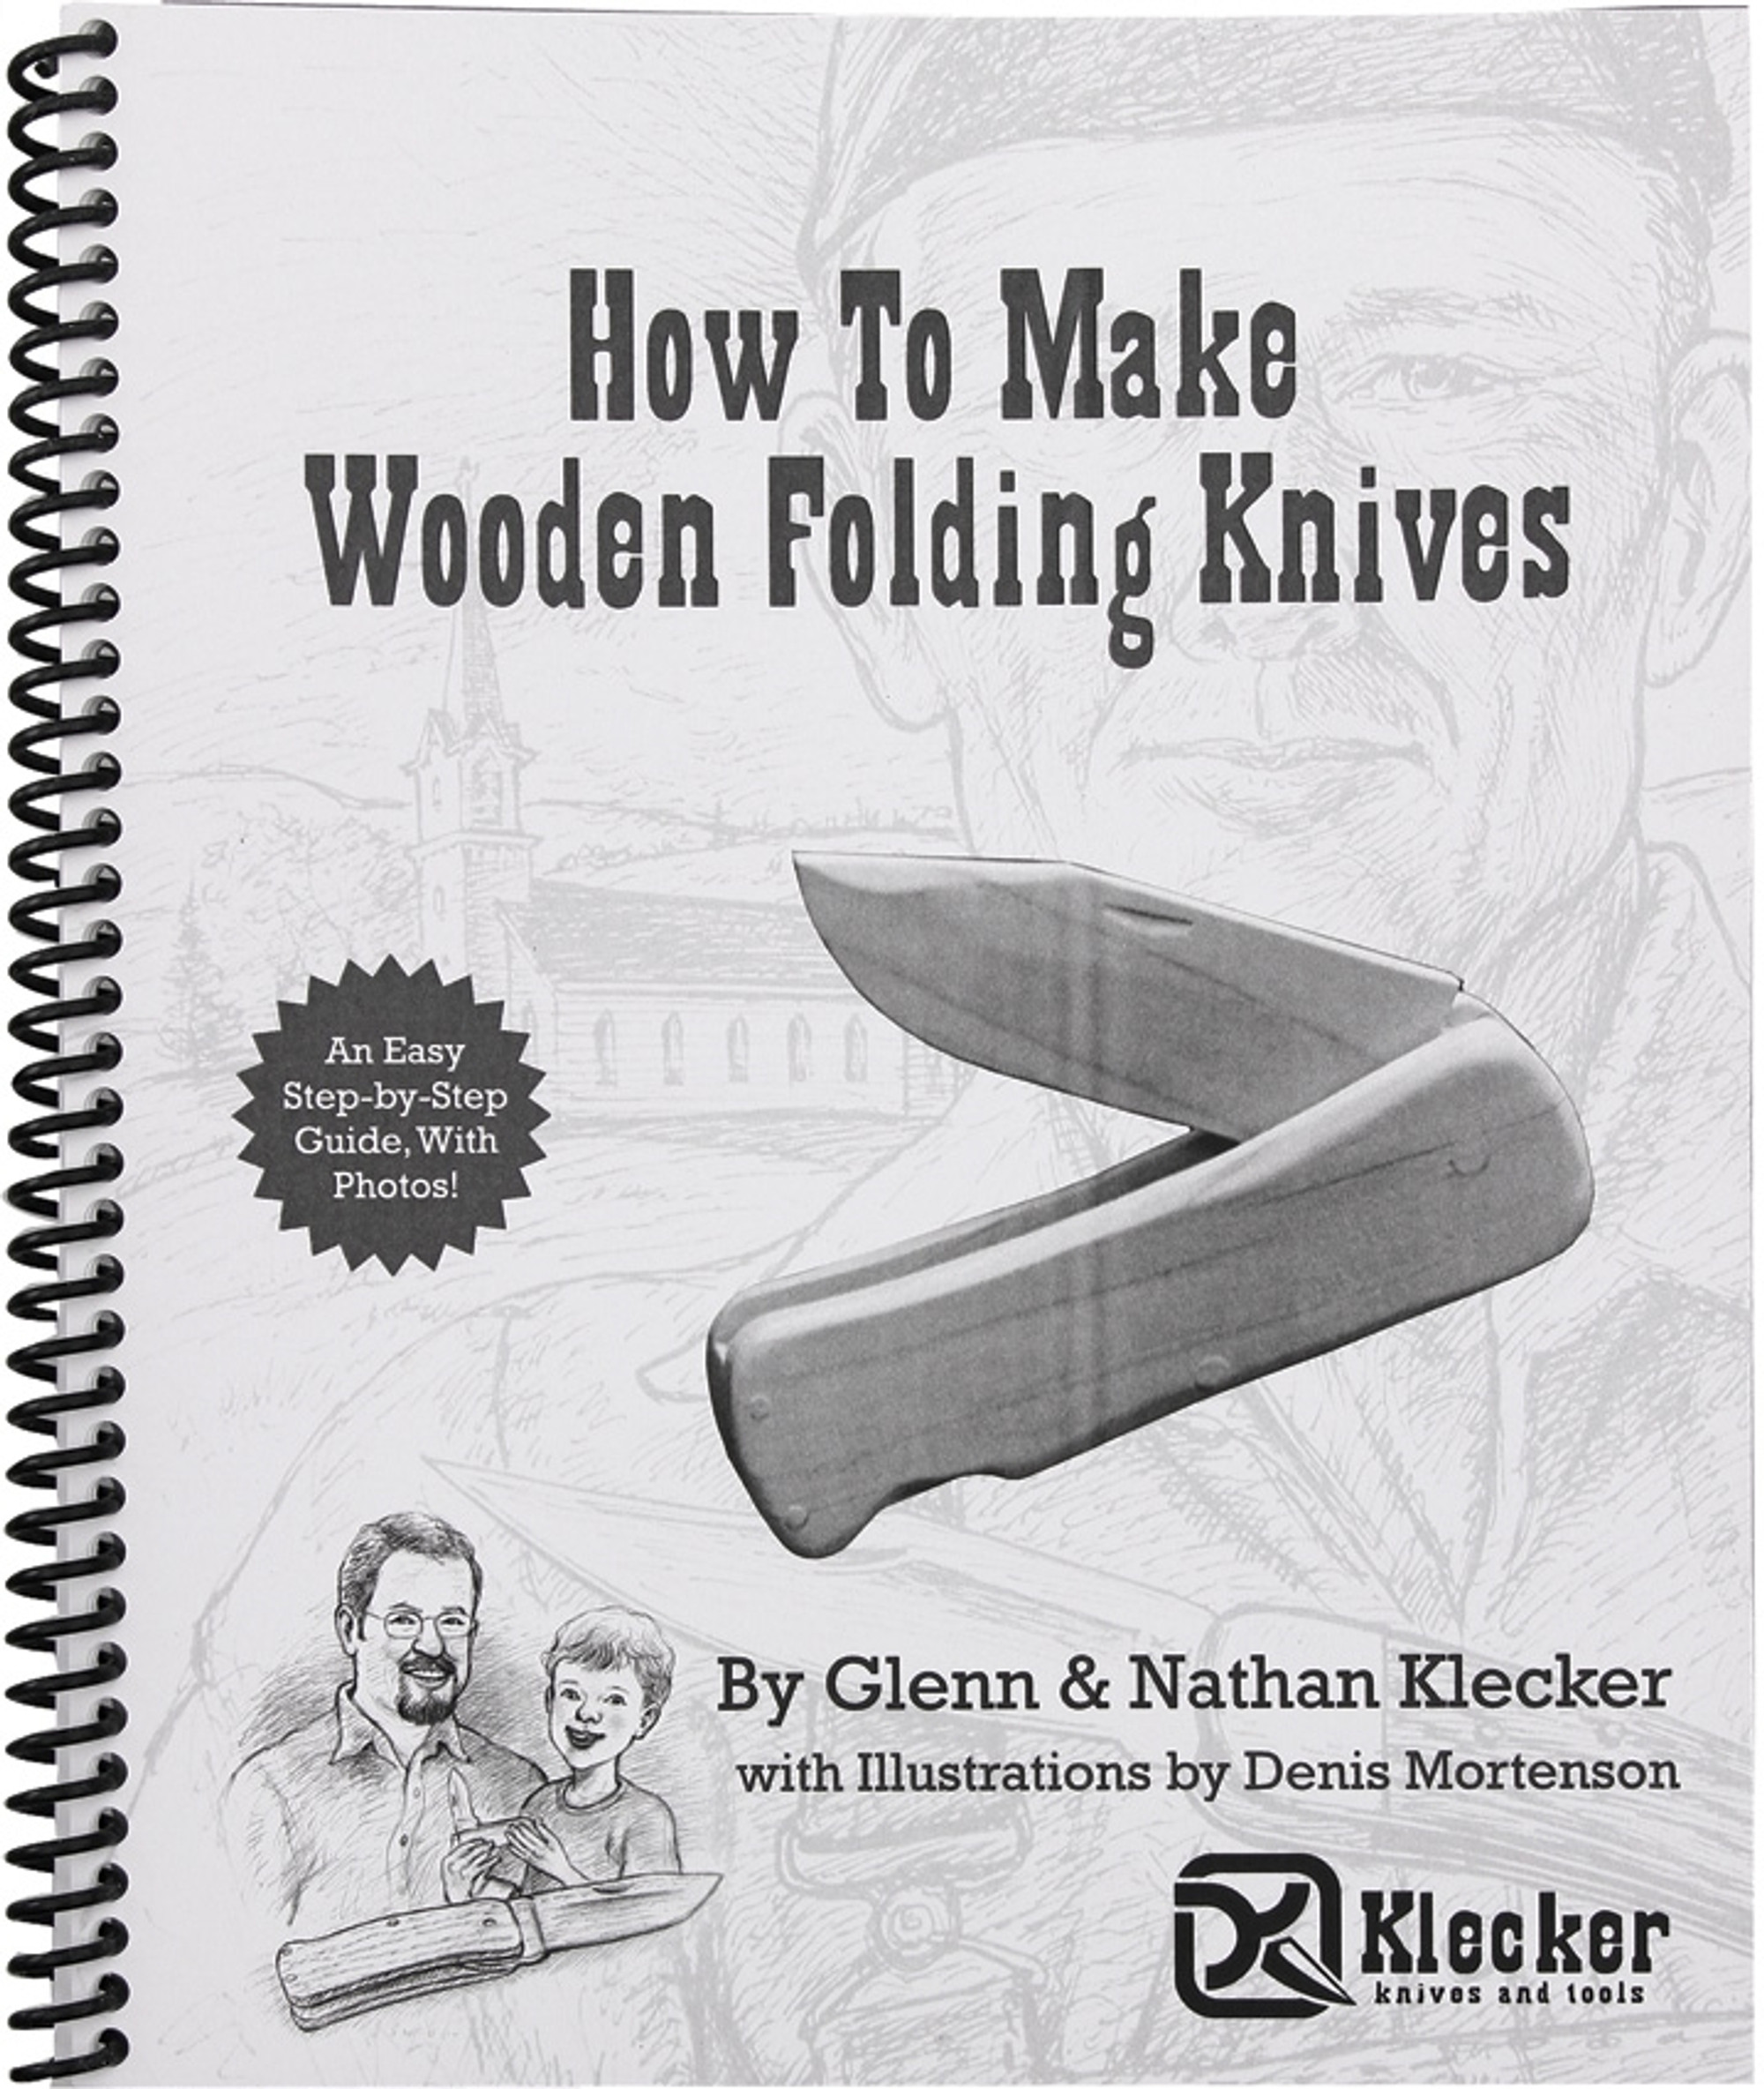 How to Make Wooden